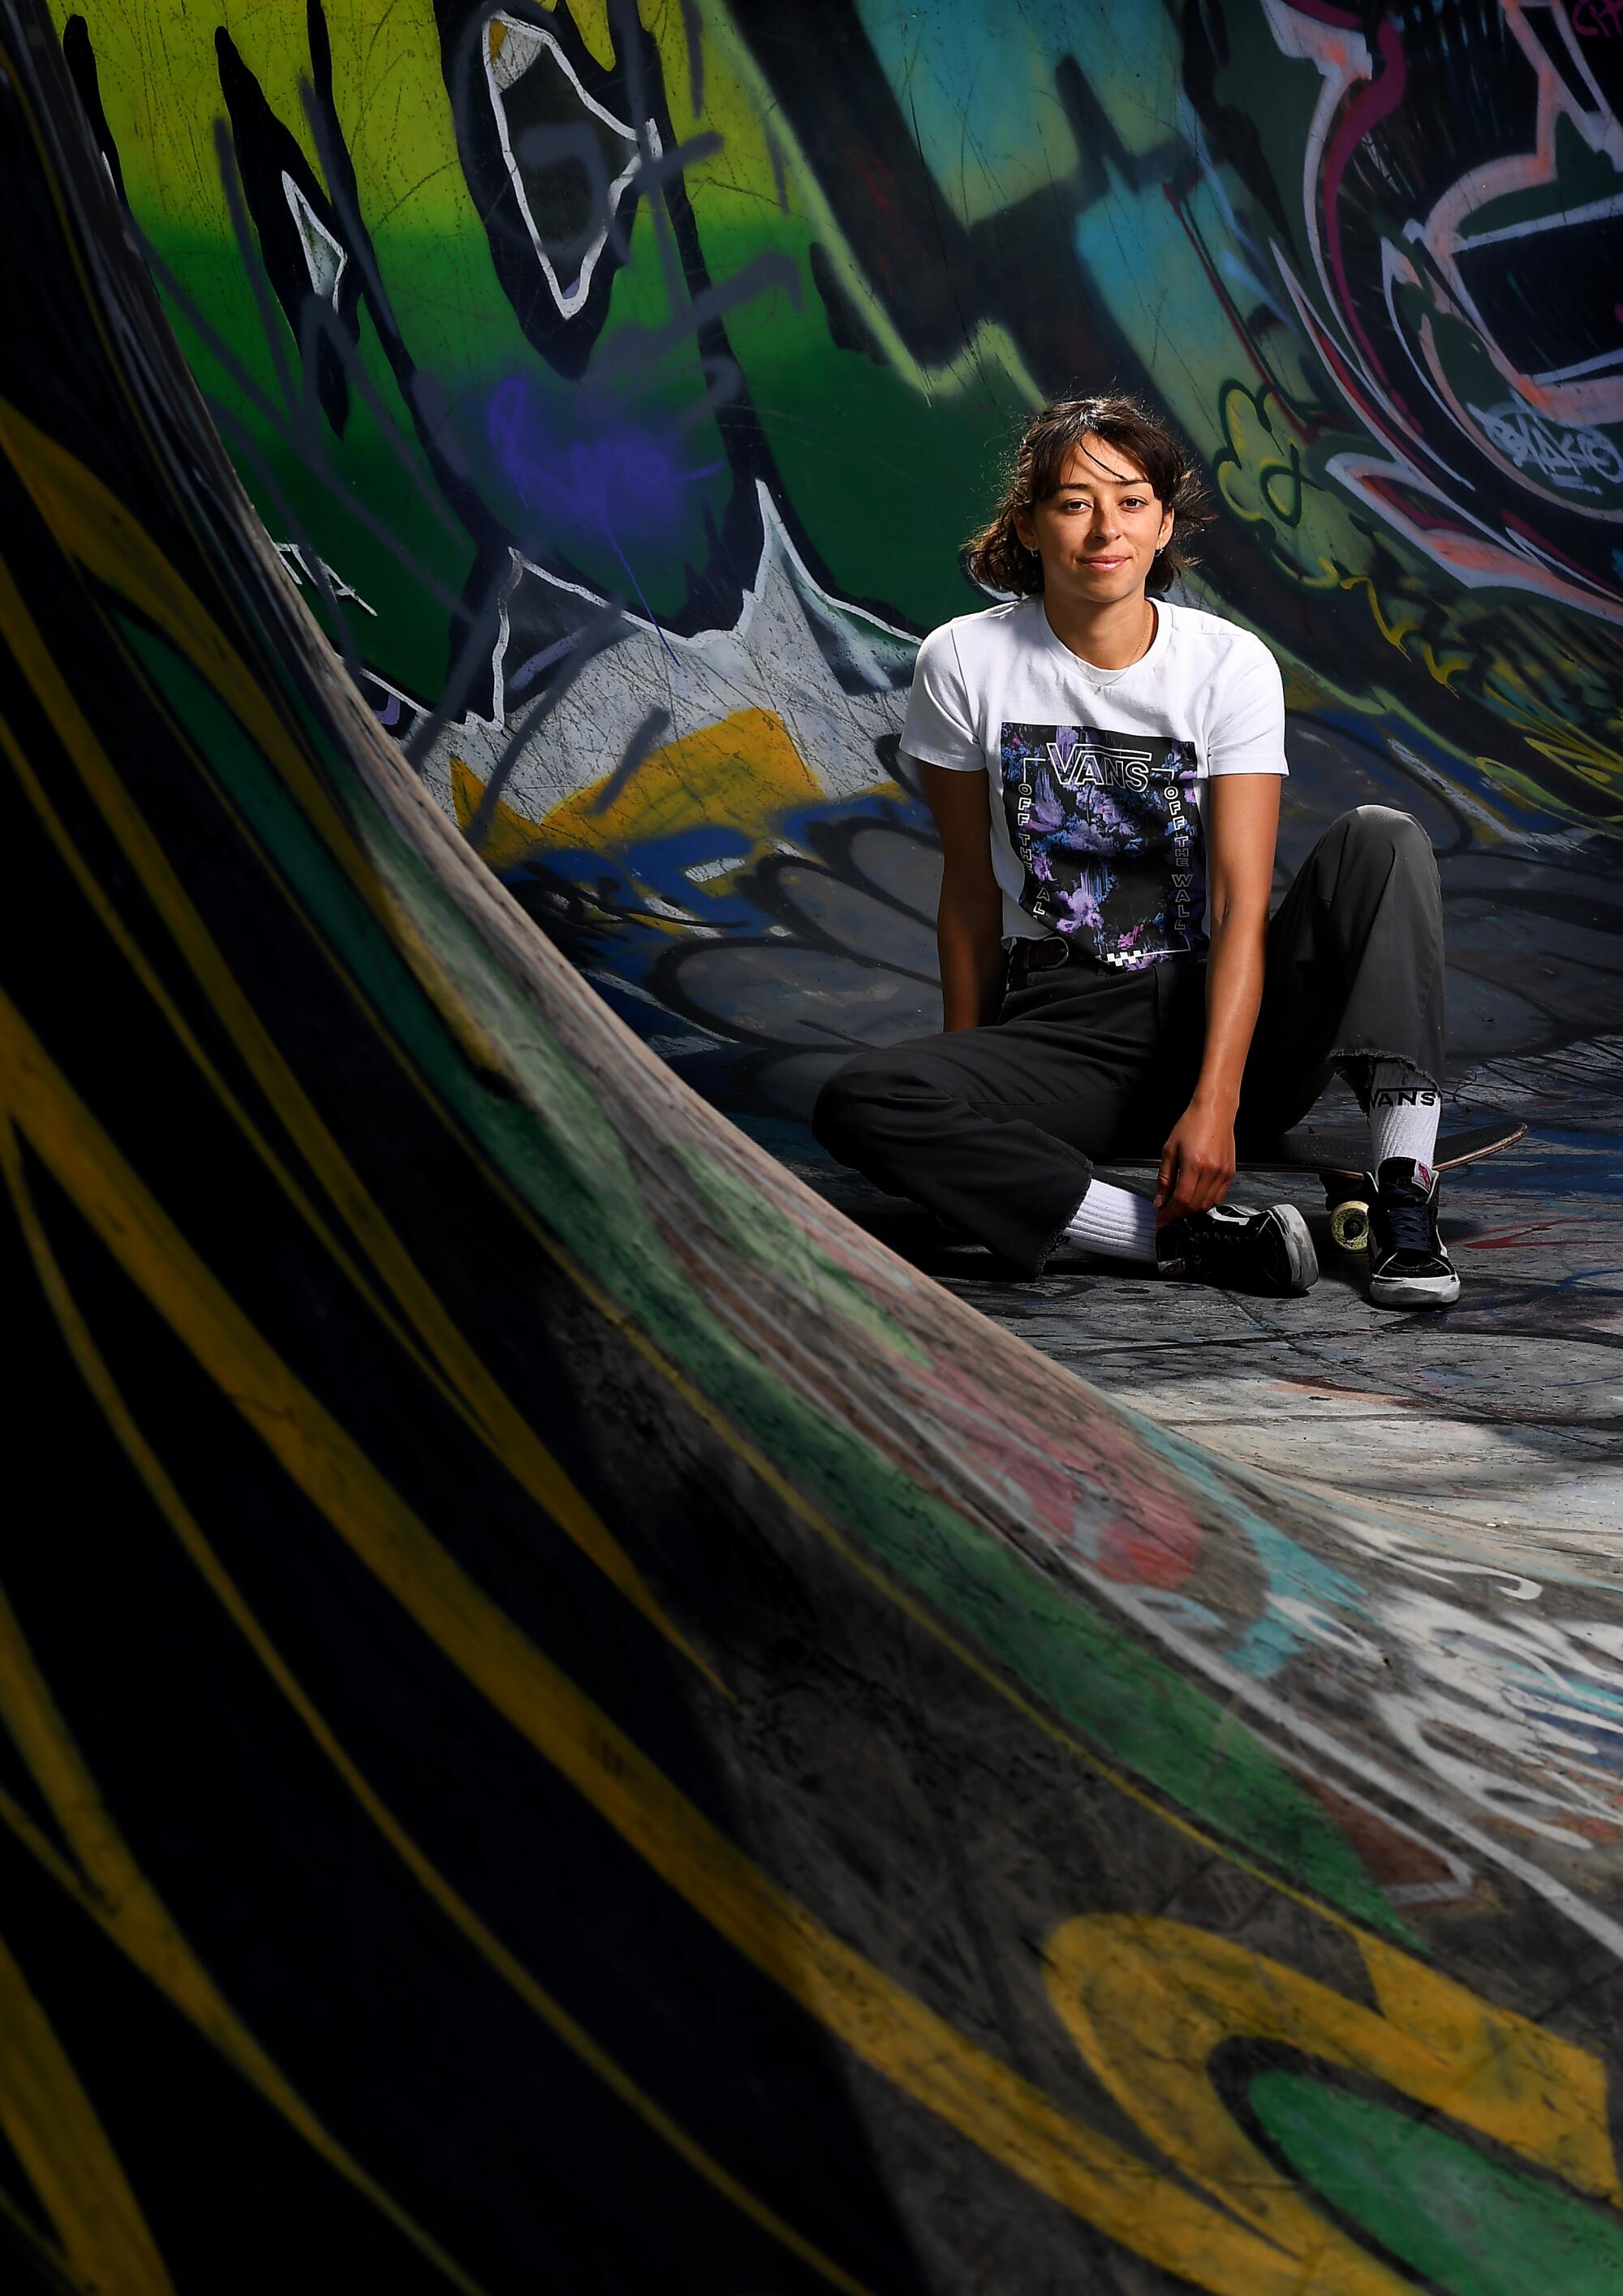 Armanto was a gold medalist at the 2013 X Games in Barcelona. Photographed at Garvanza Skate Park in Los Angeles.